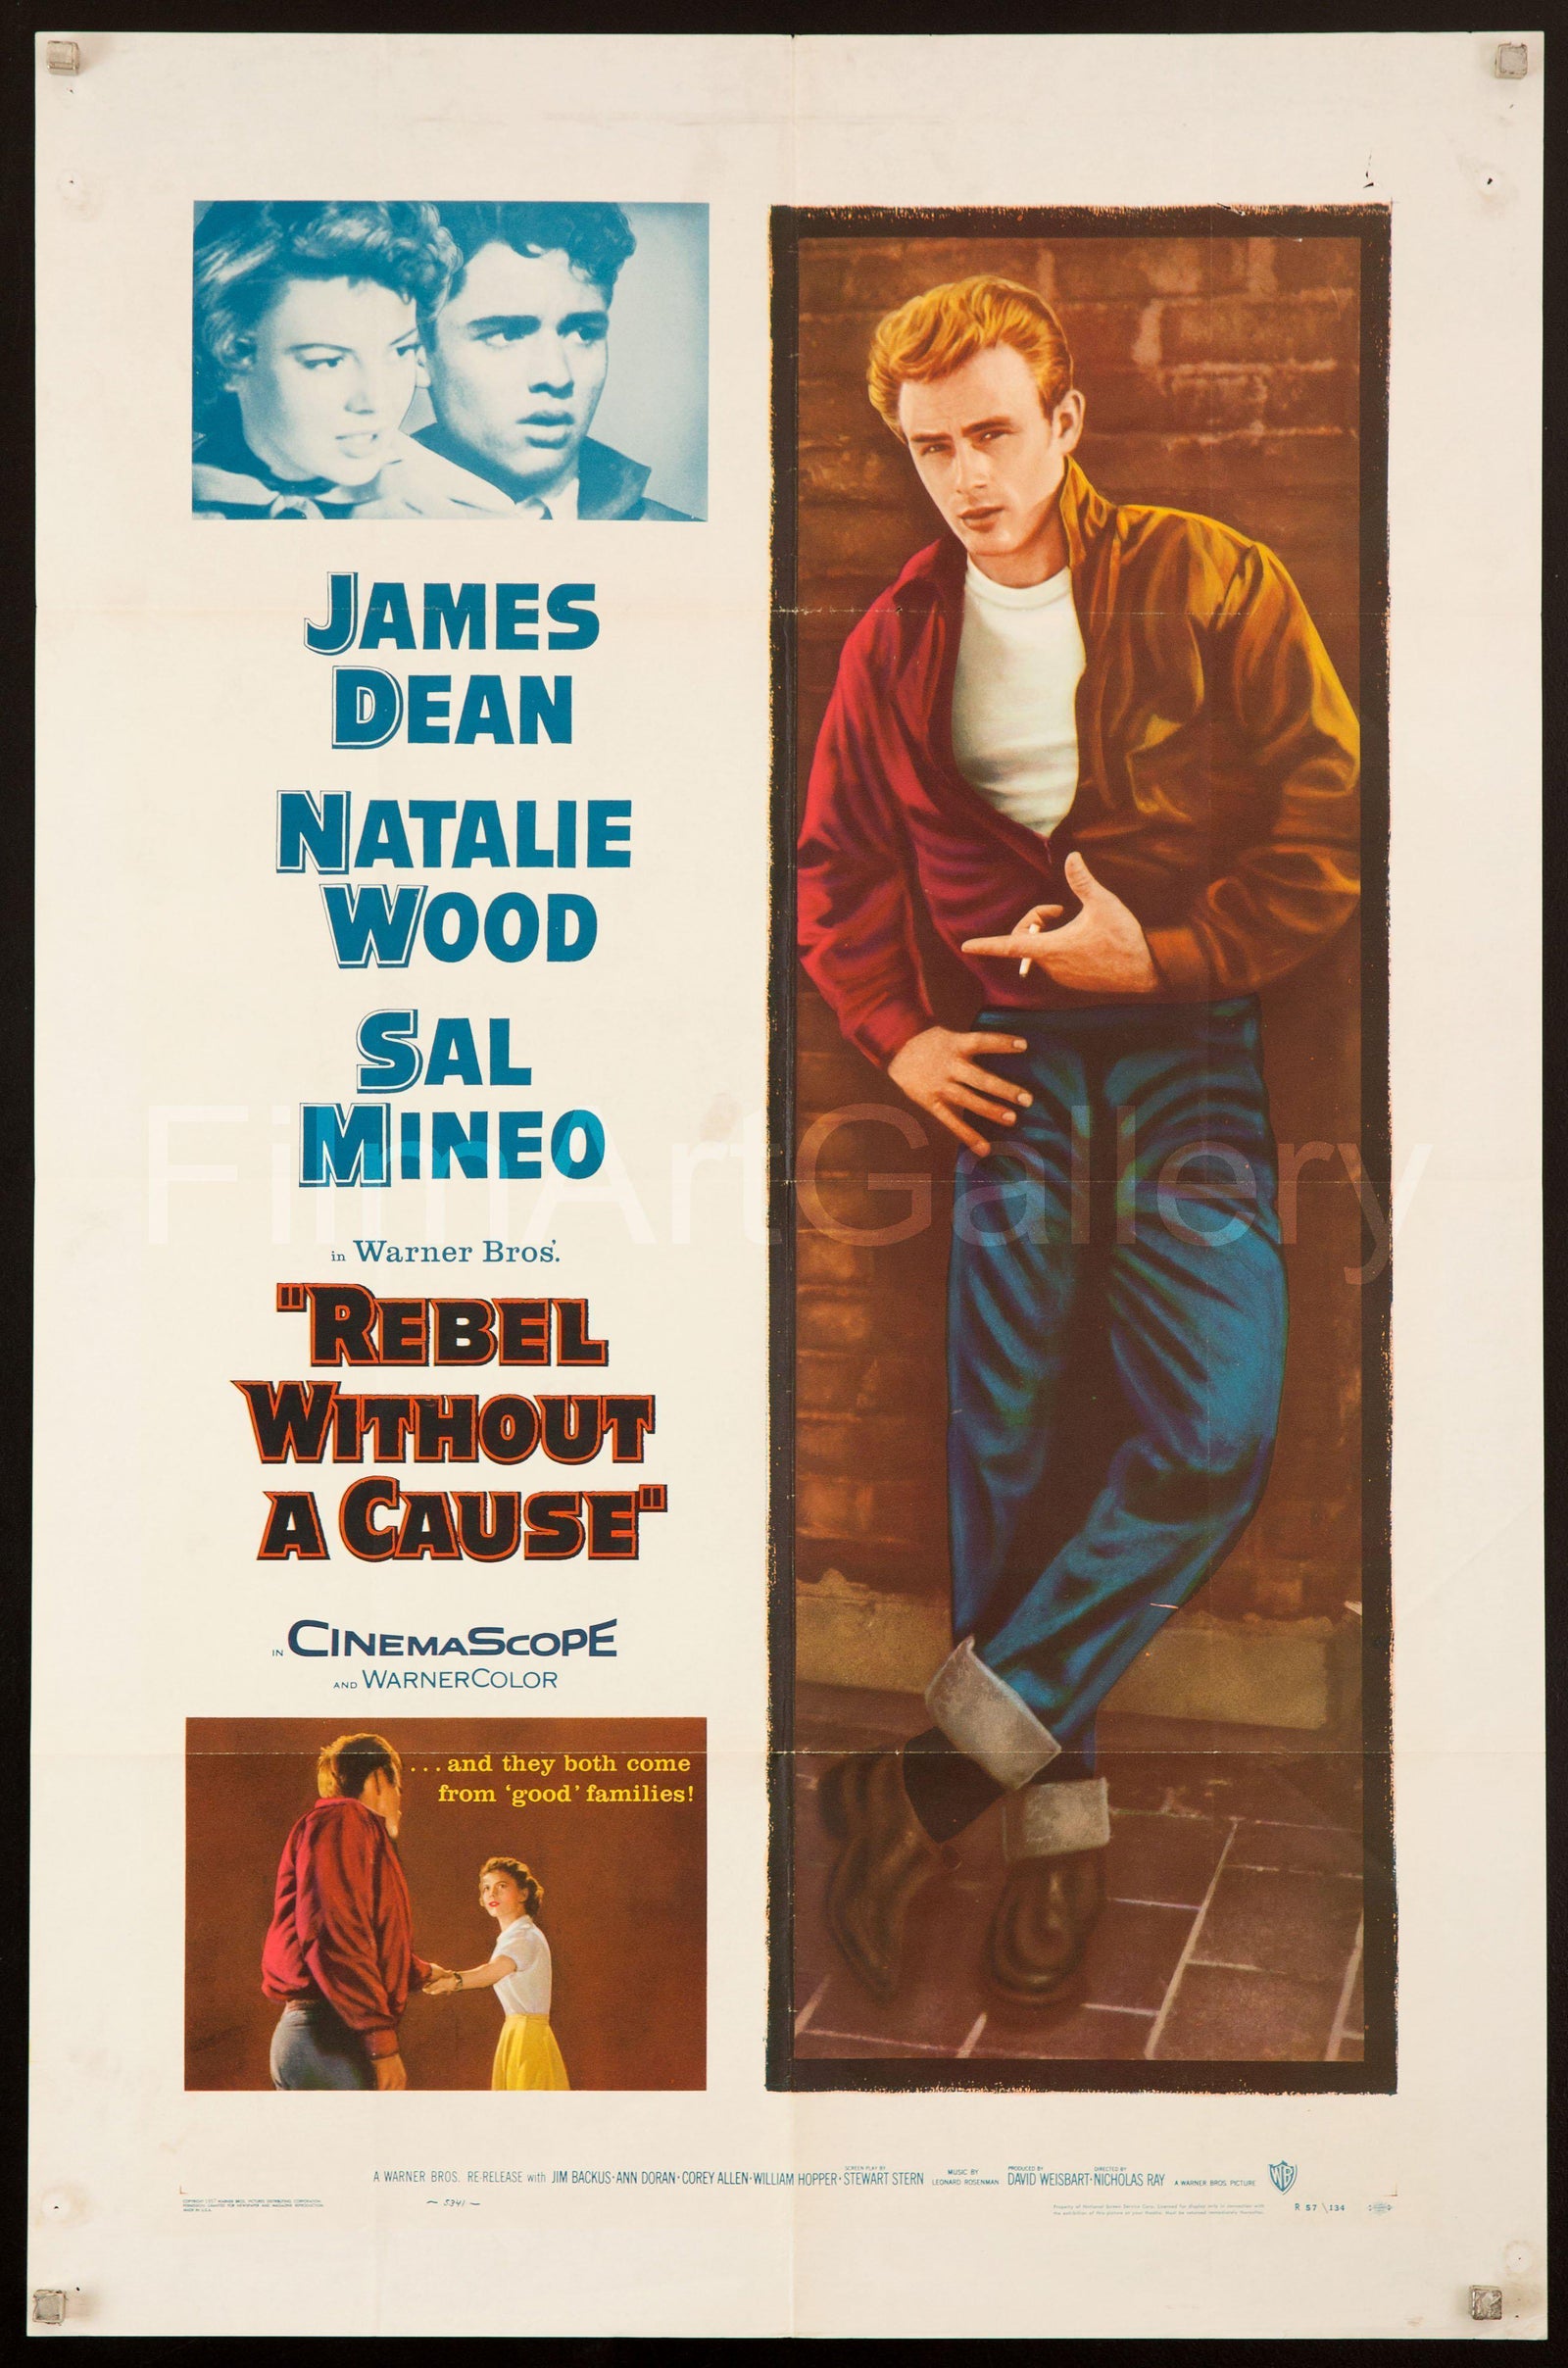 Rebel Without a Cause Movie Poster 1957 RI 1 Sheet (27x41)